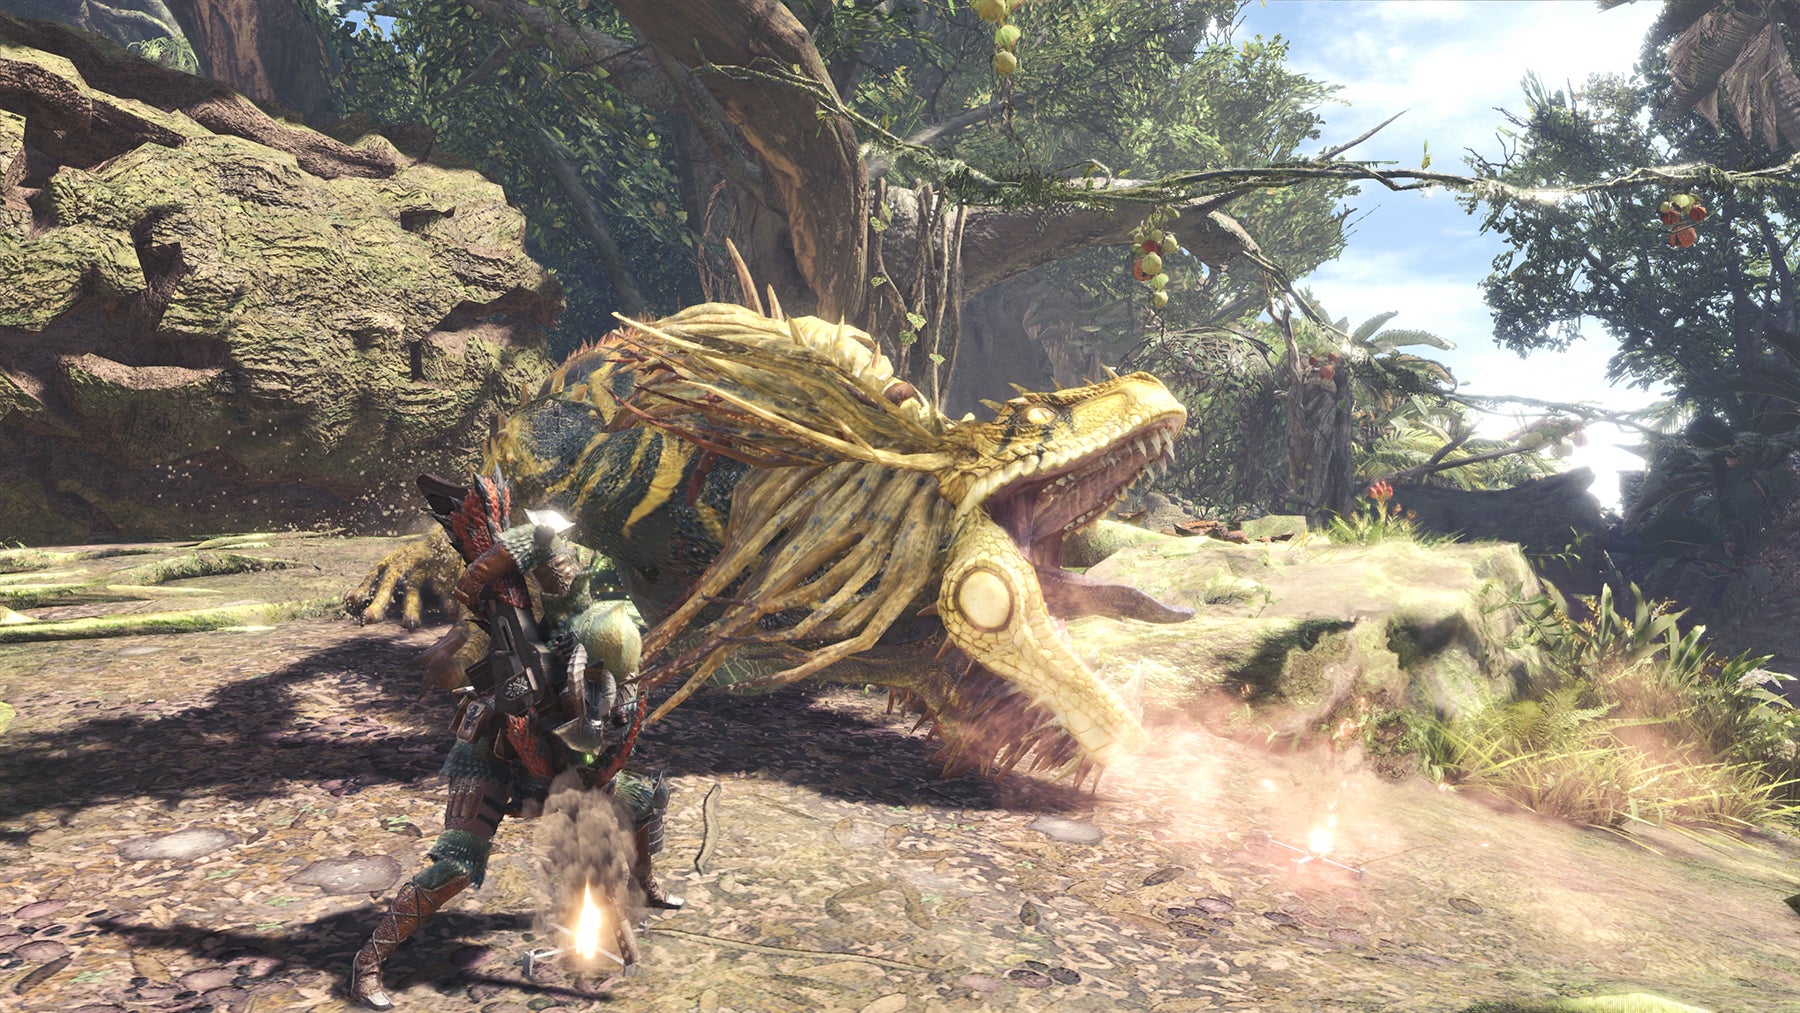 Image for Monster Hunter World Great Jagras - How to Track and Kill the Great Jagras in Monster Hunter World.